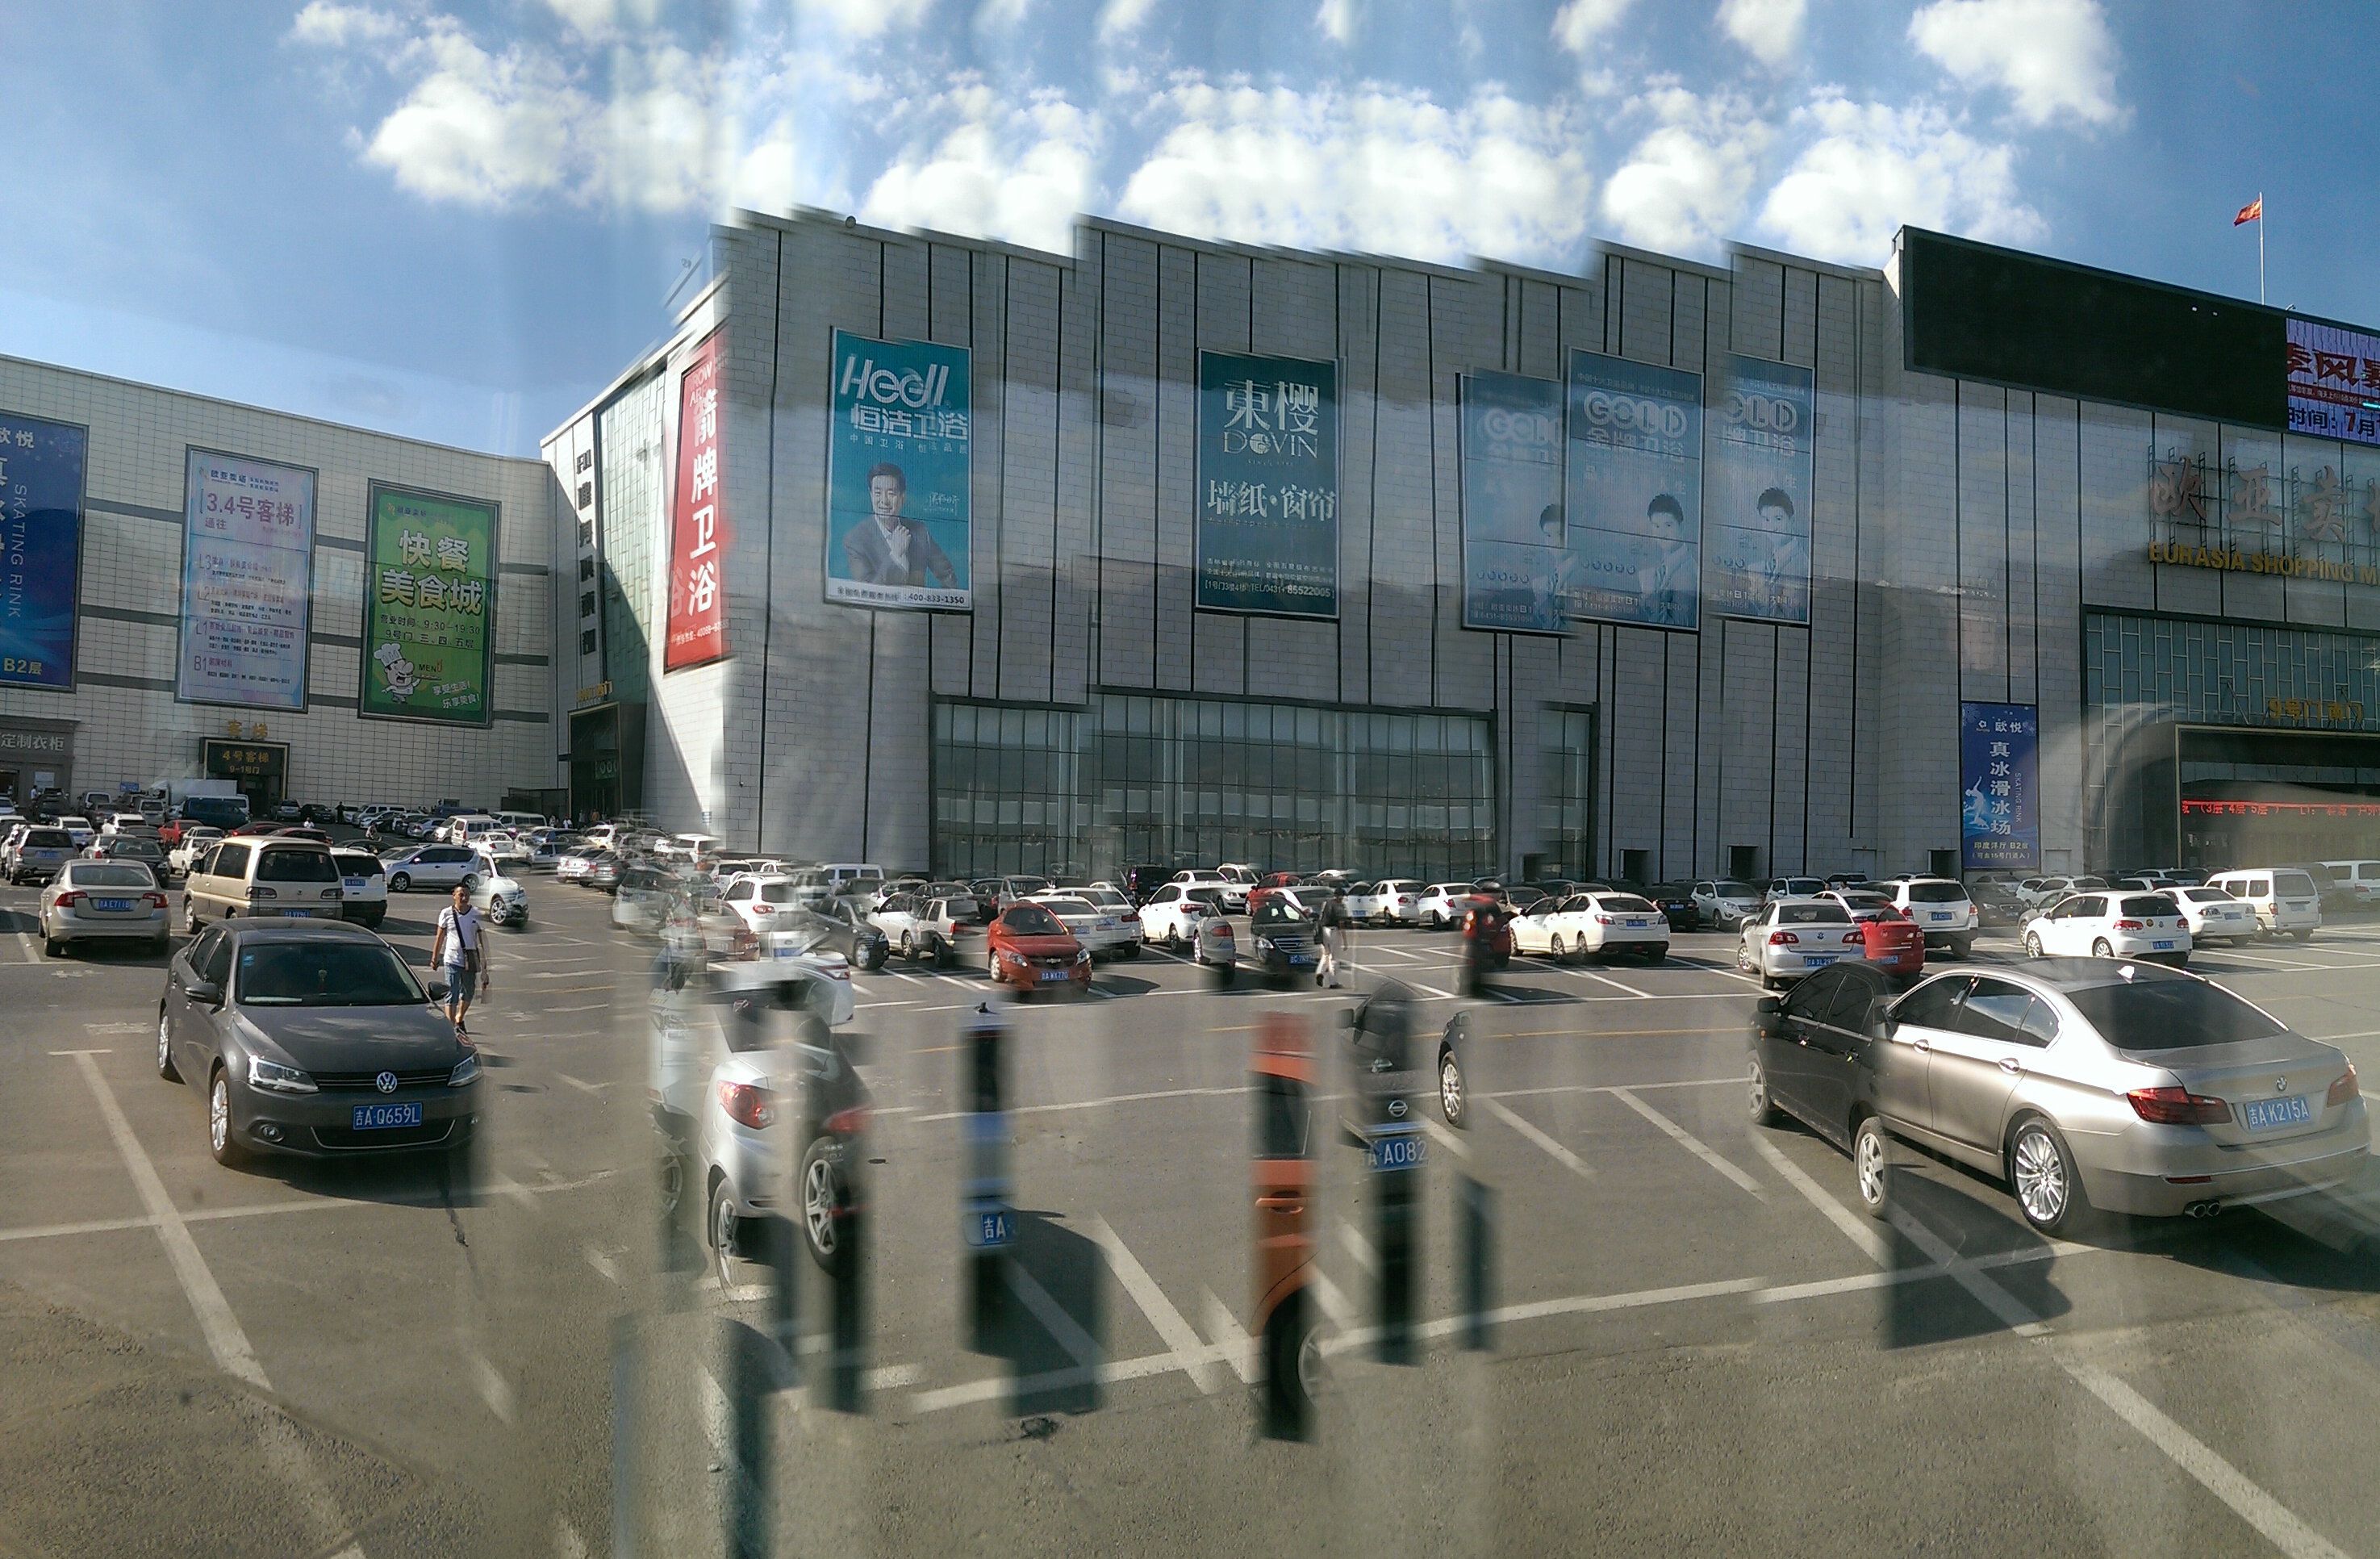 [trippy panorama of a shopping mall]